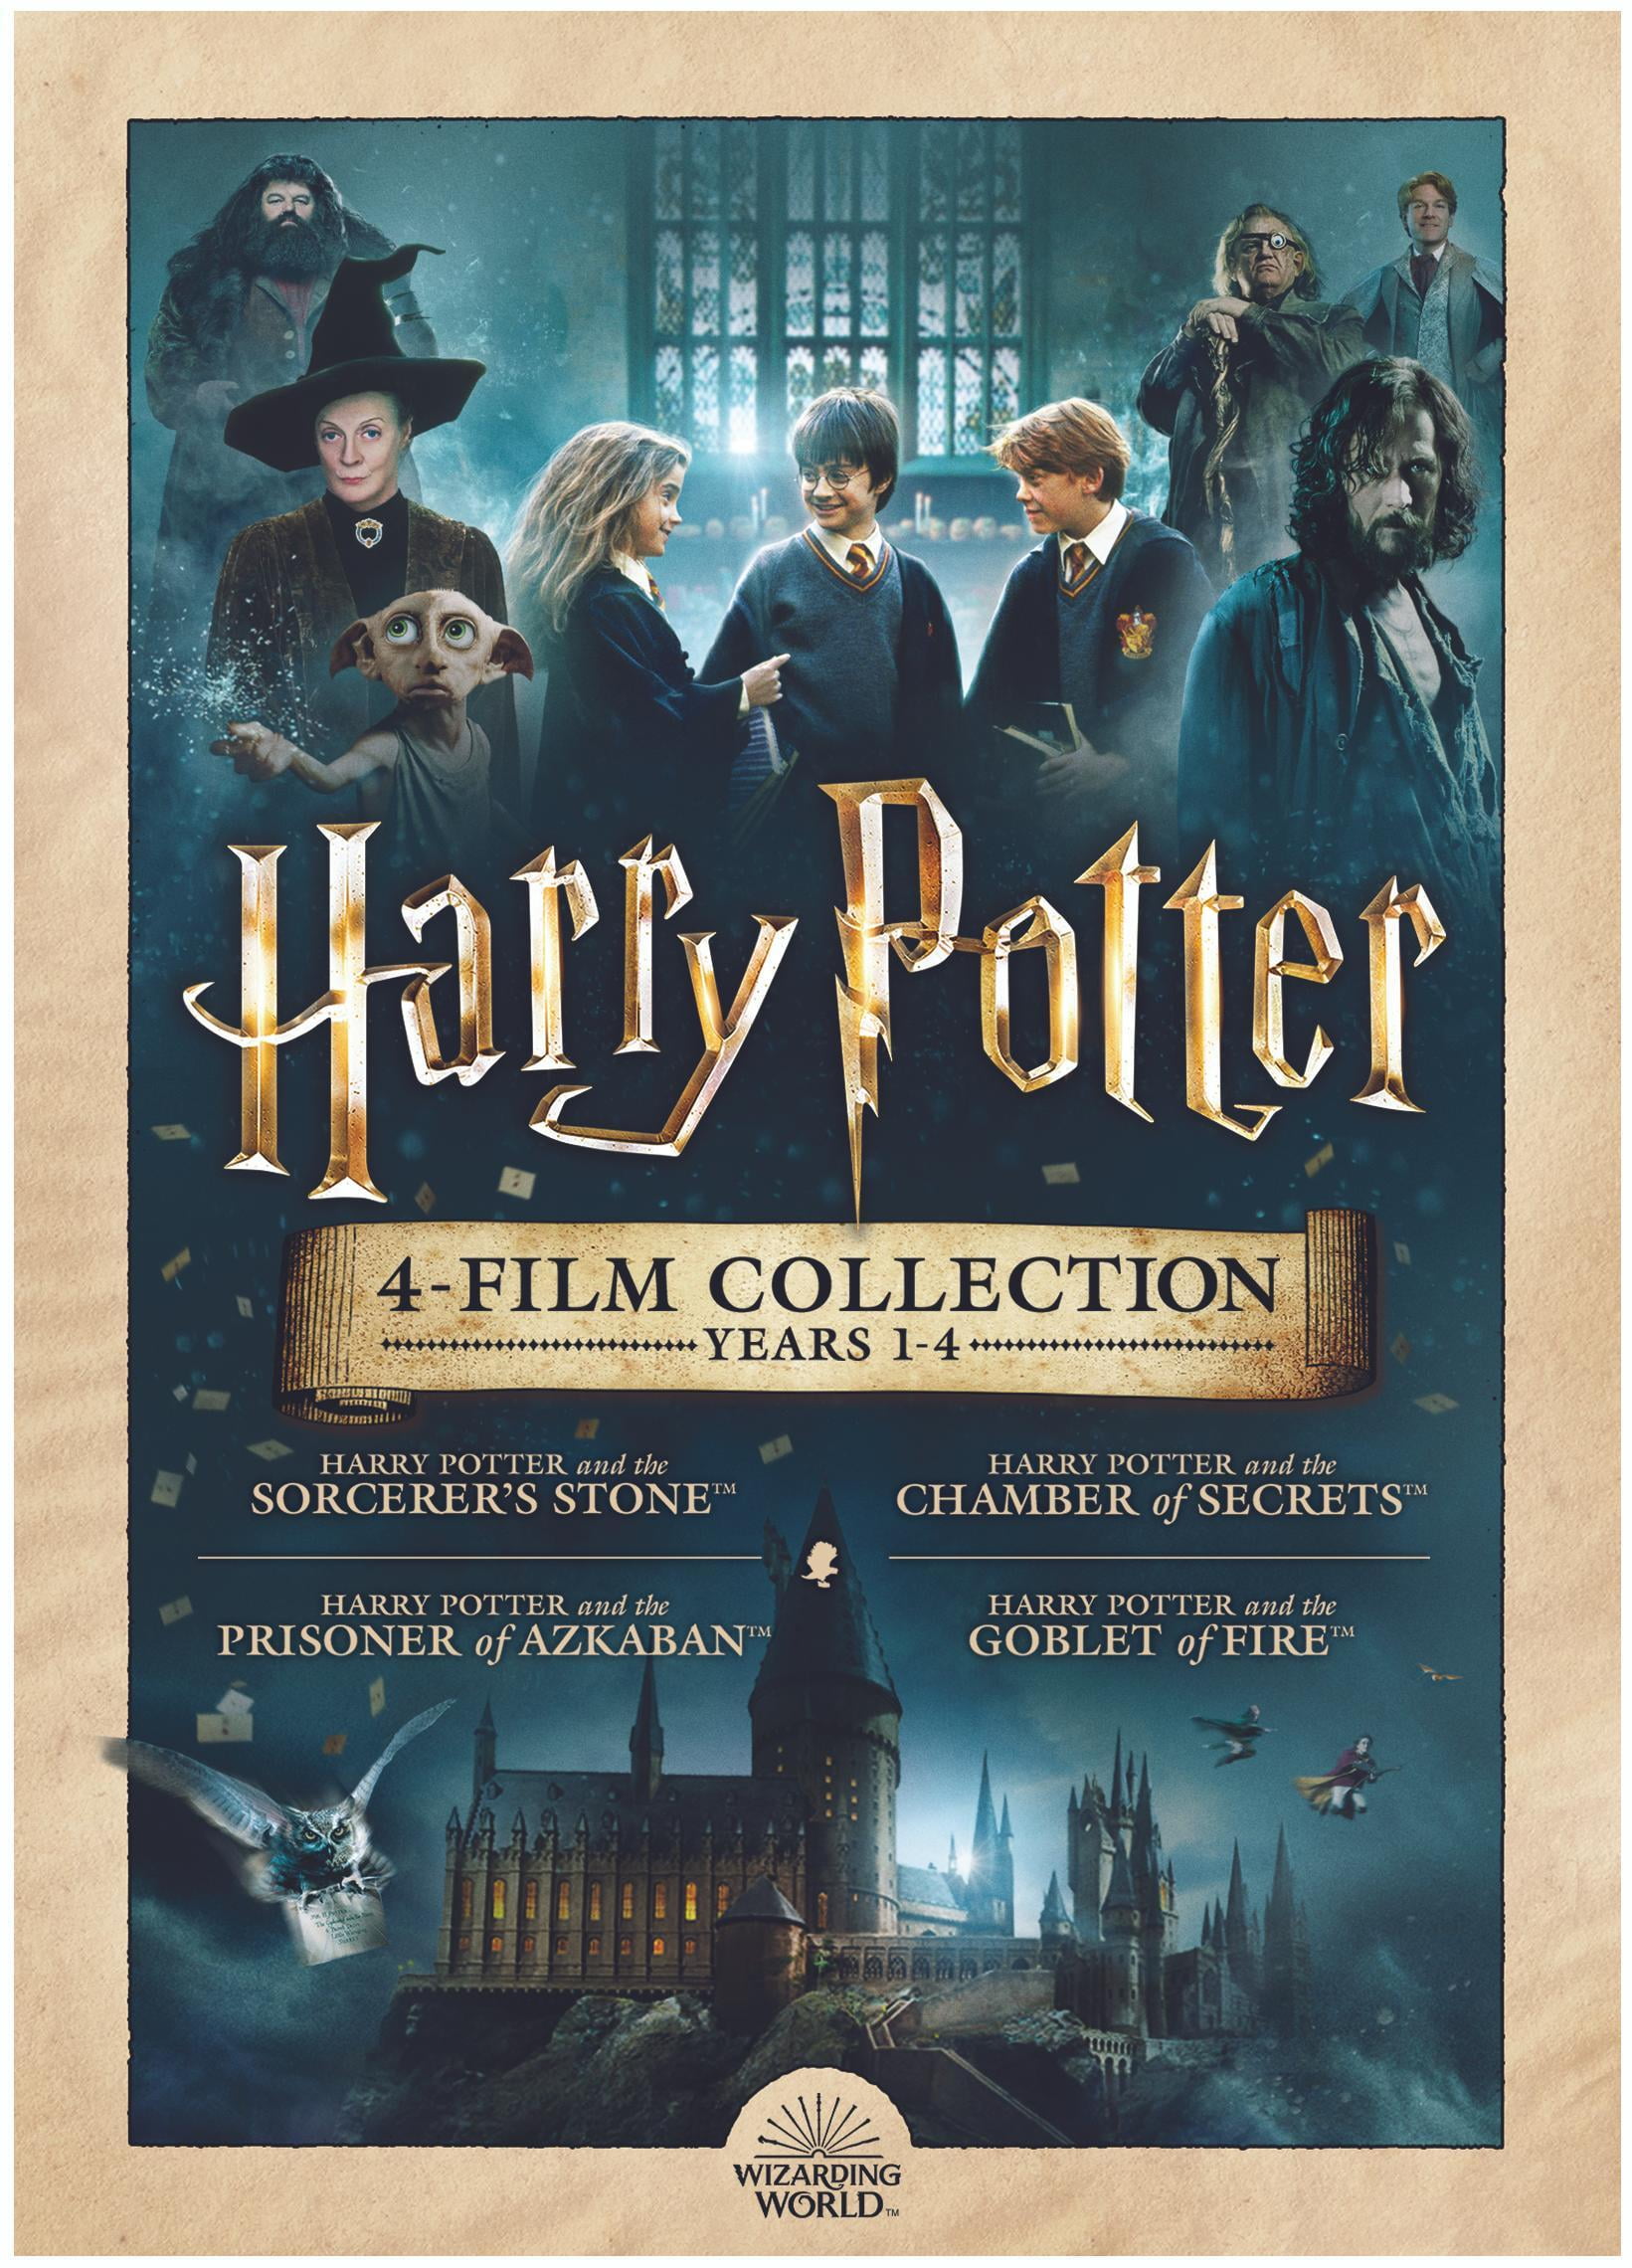 Harry Potter 4-Film Collection: Years 1-4 (DVD) (Walmart Exclusive)